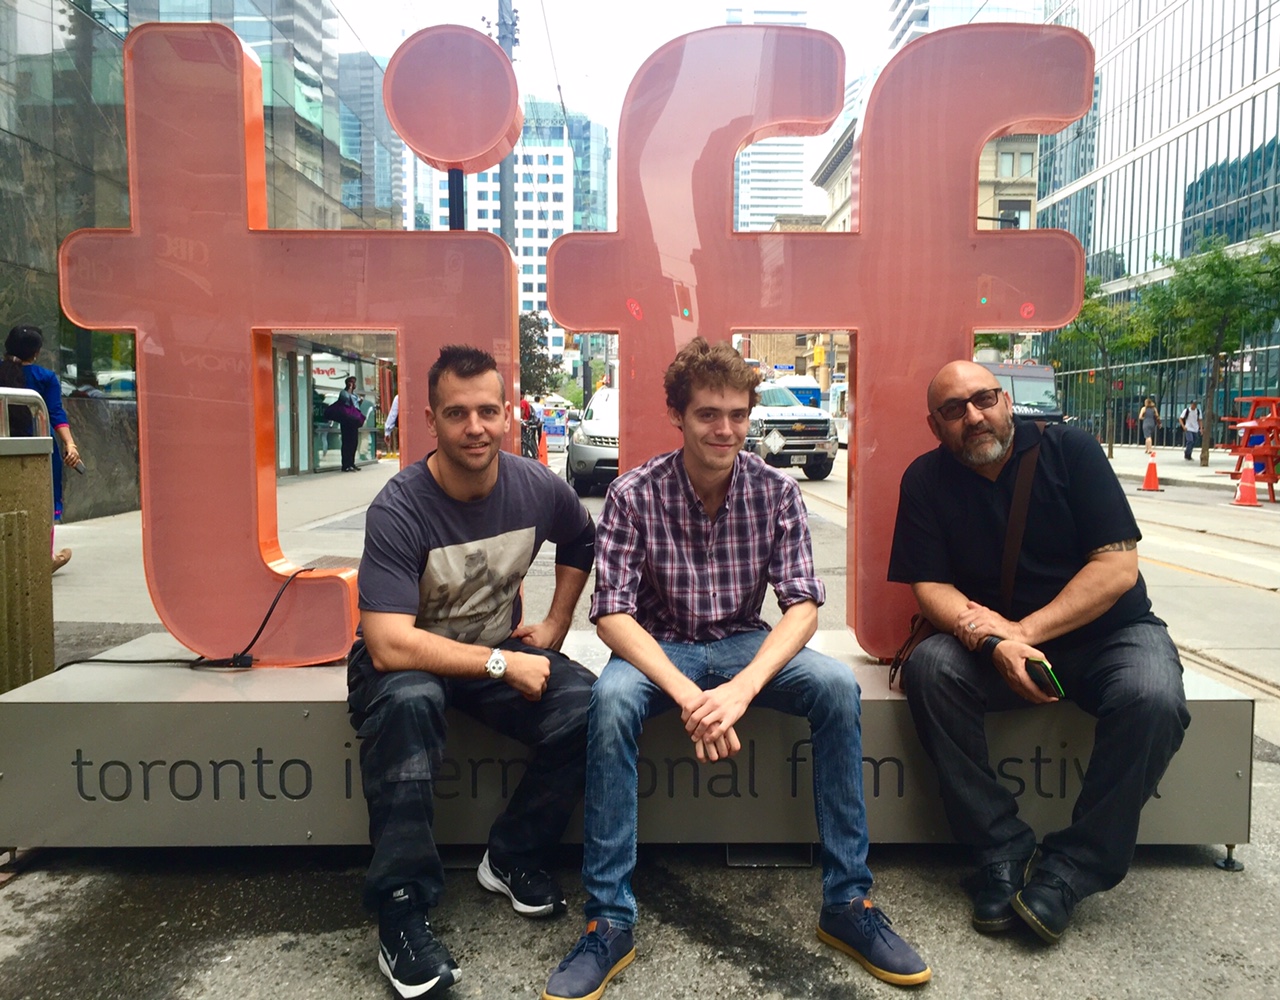 Robert Corrigan (left) sits alongside his team from Wirrin Media outside the Toronto Film Festival in Canada.